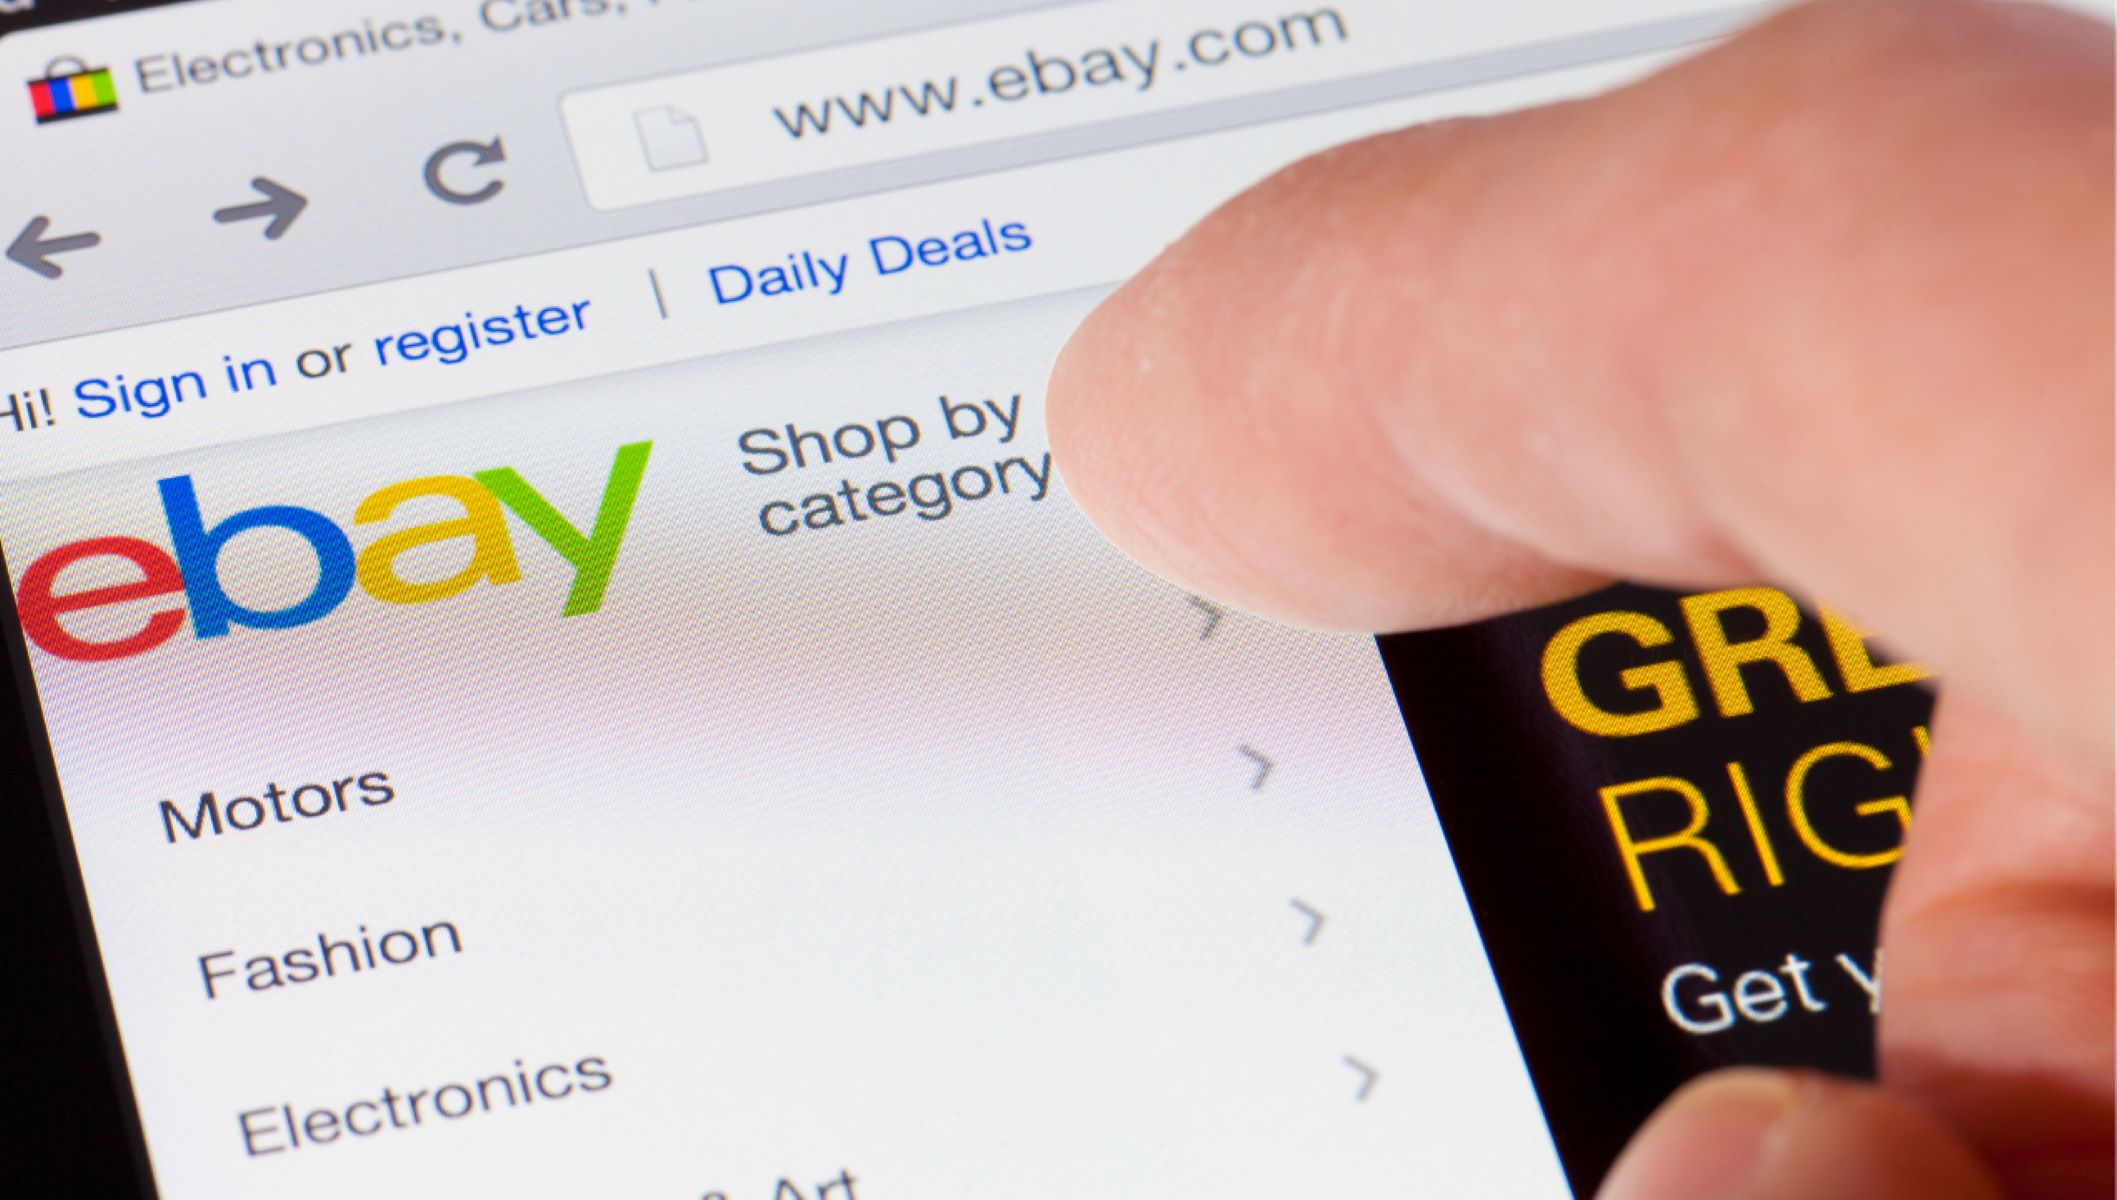 ebay-introduces-ai-tool-for-generating-product-listings-from-photos